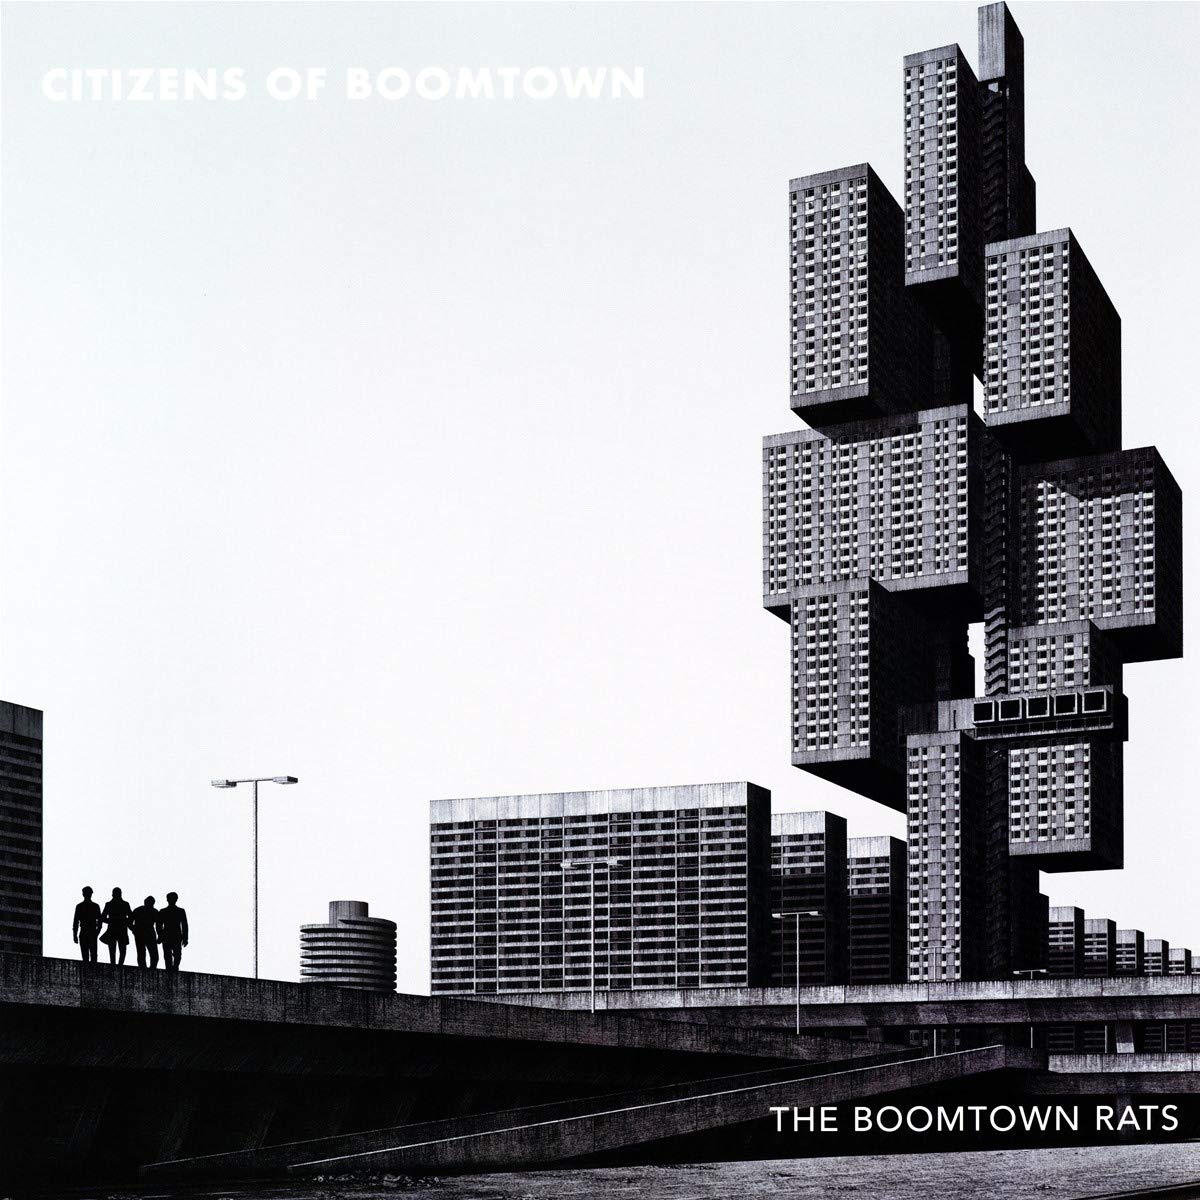 The Boomtown Rats-Citizens Of Boomtown-(538592342)-CD-FLAC-2020-WRE